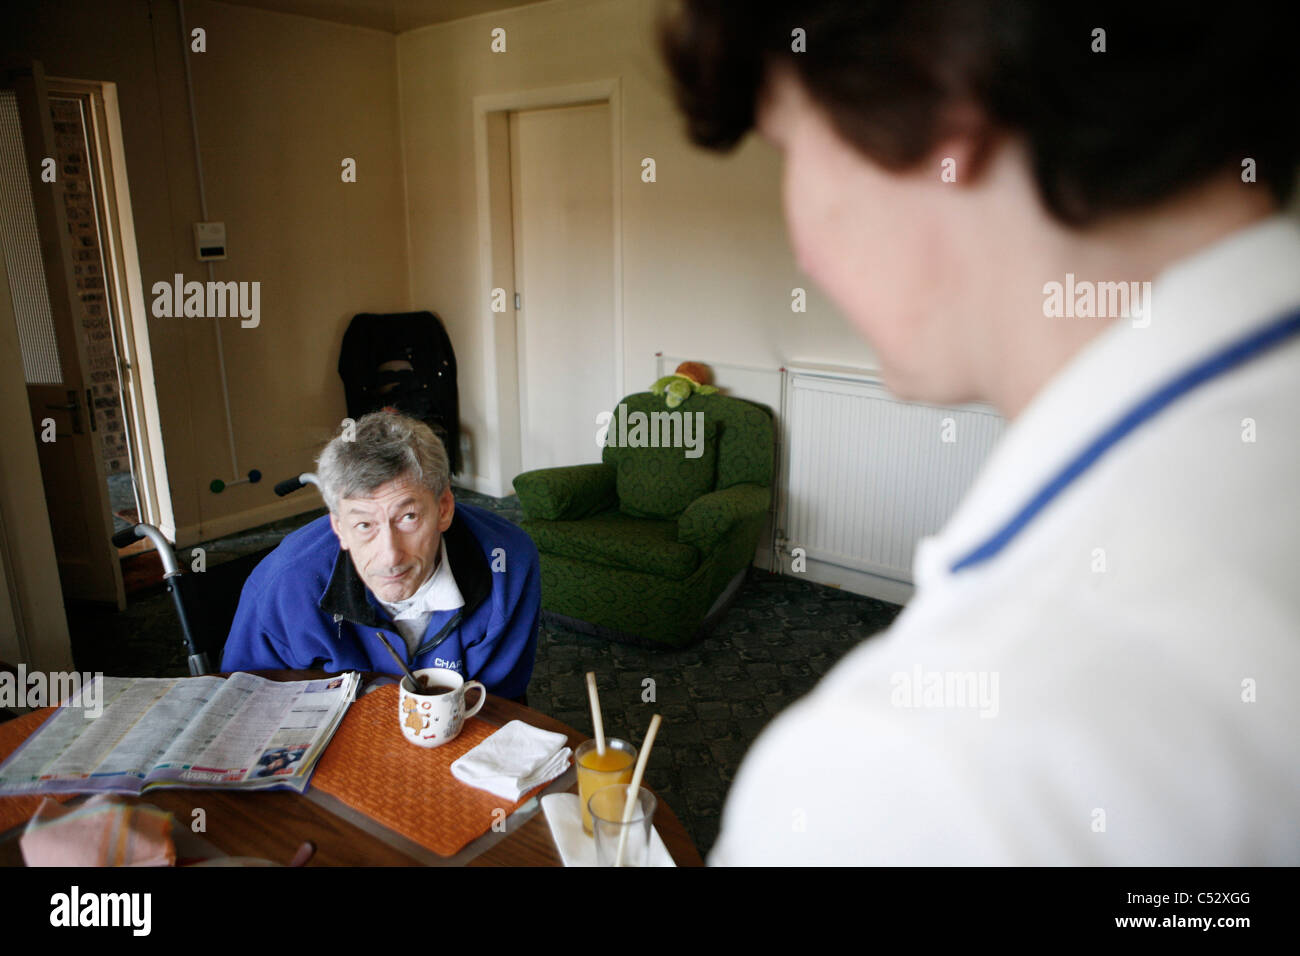 A 'Carewatch' worker caring for a customer in their own home. Stock Photo